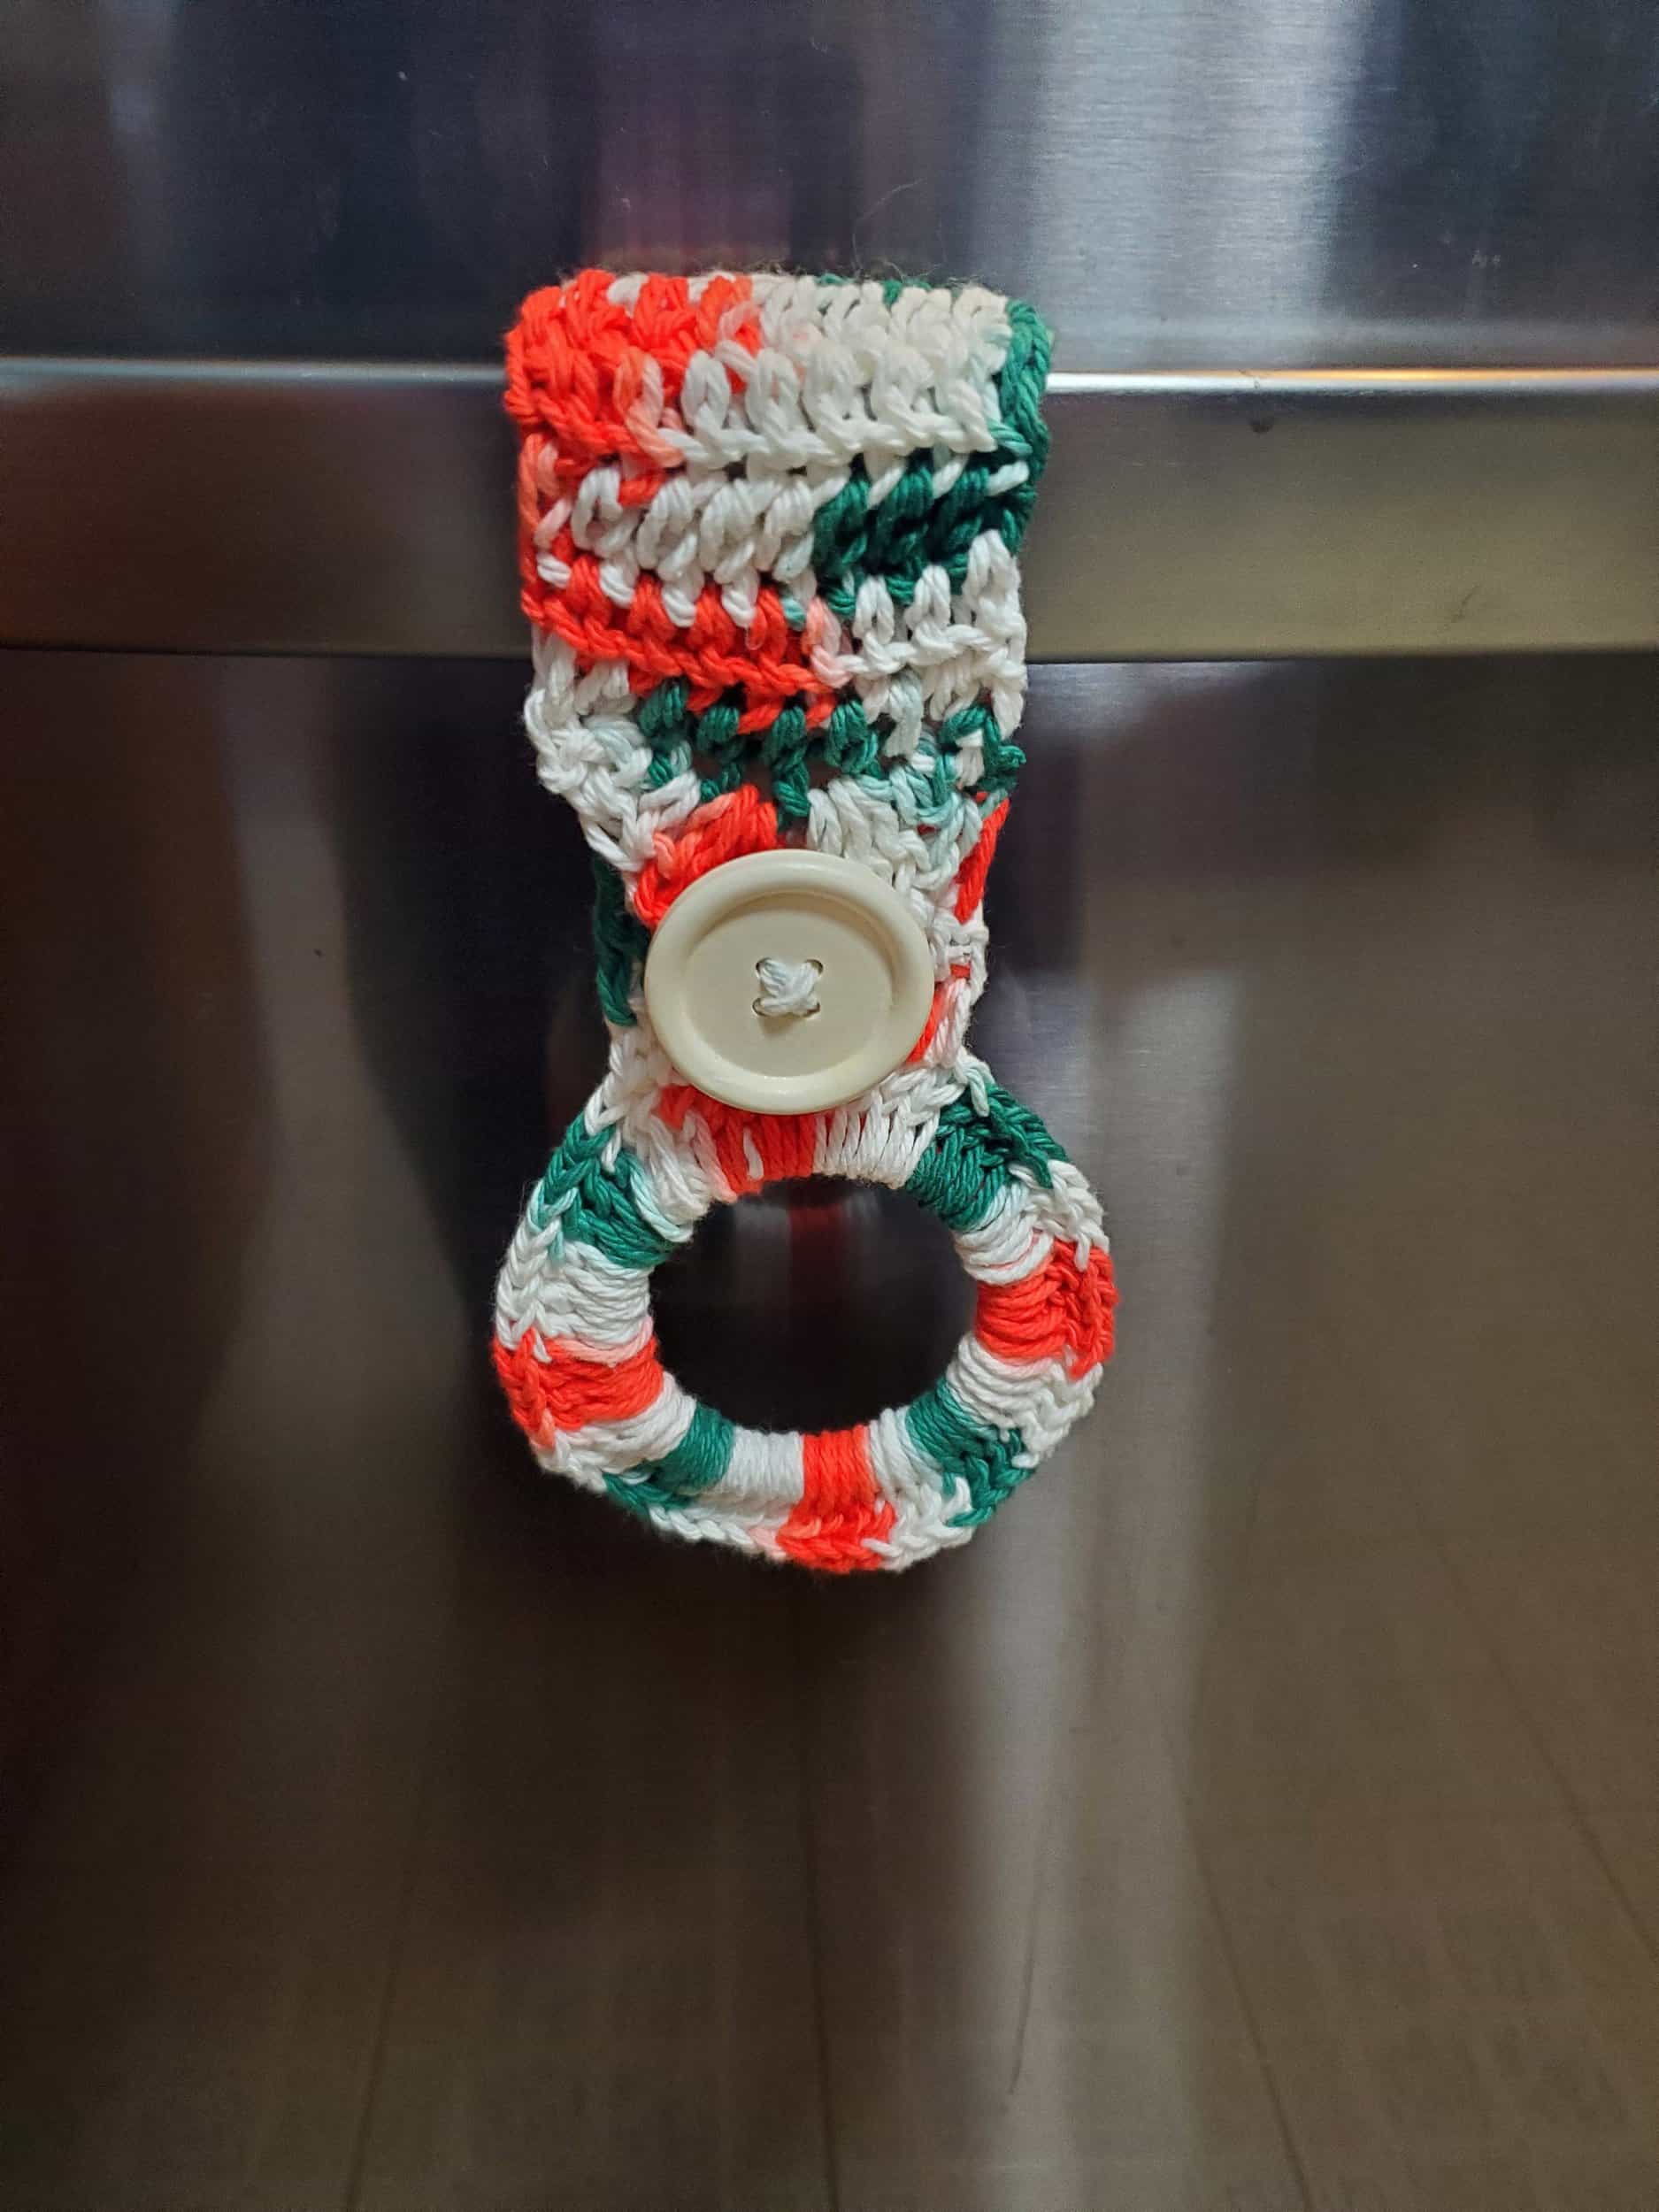 This Crochet Towel Holder Kitchen Towel Holder Hand Towel Holder Dishcloth Holder Dish Towel Holder Christmas Holiday Theme is made with love by 3ChickswithSticks! Shop more unique gift ideas today with Spots Initiatives, the best way to support creators.